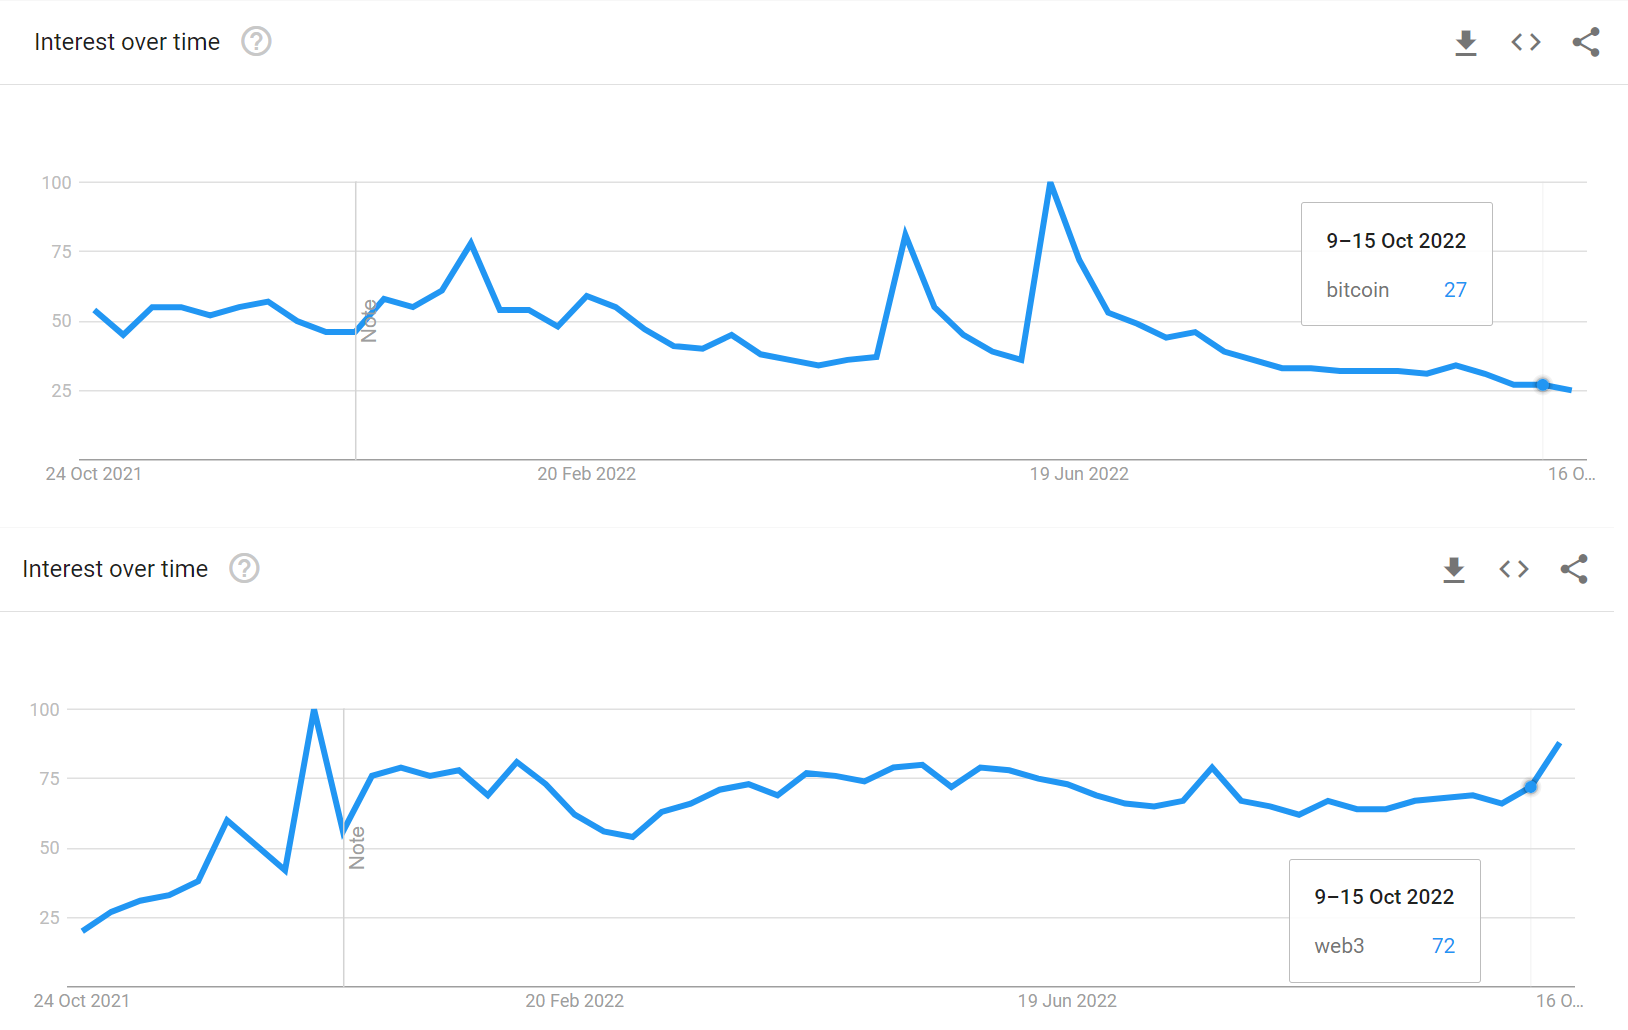 Google Search Trends for Bitcoin and Web 3. 